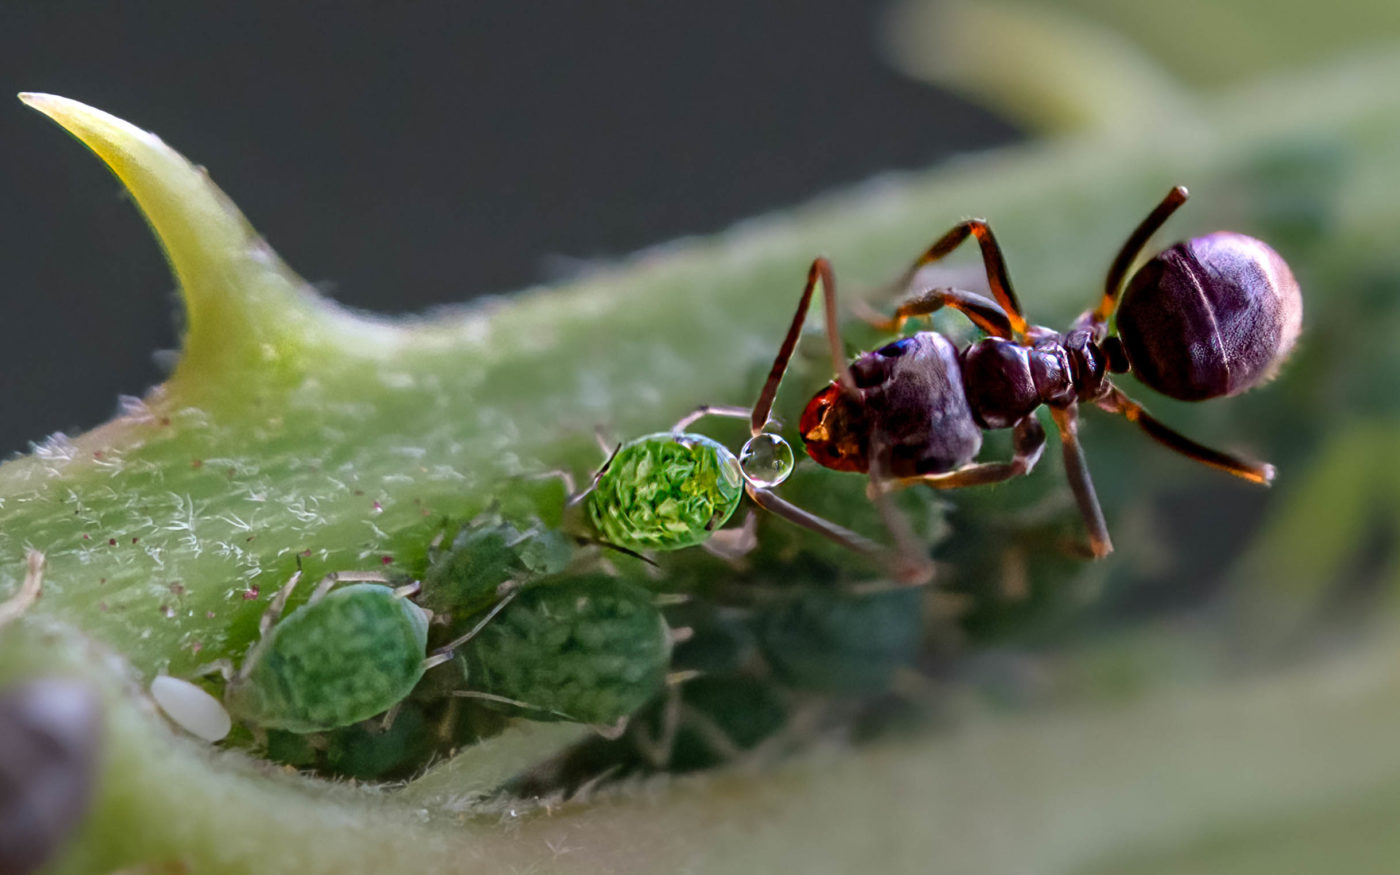 Black garden ant, Lasius niger, collecting beads of water on a thorned plant stalk